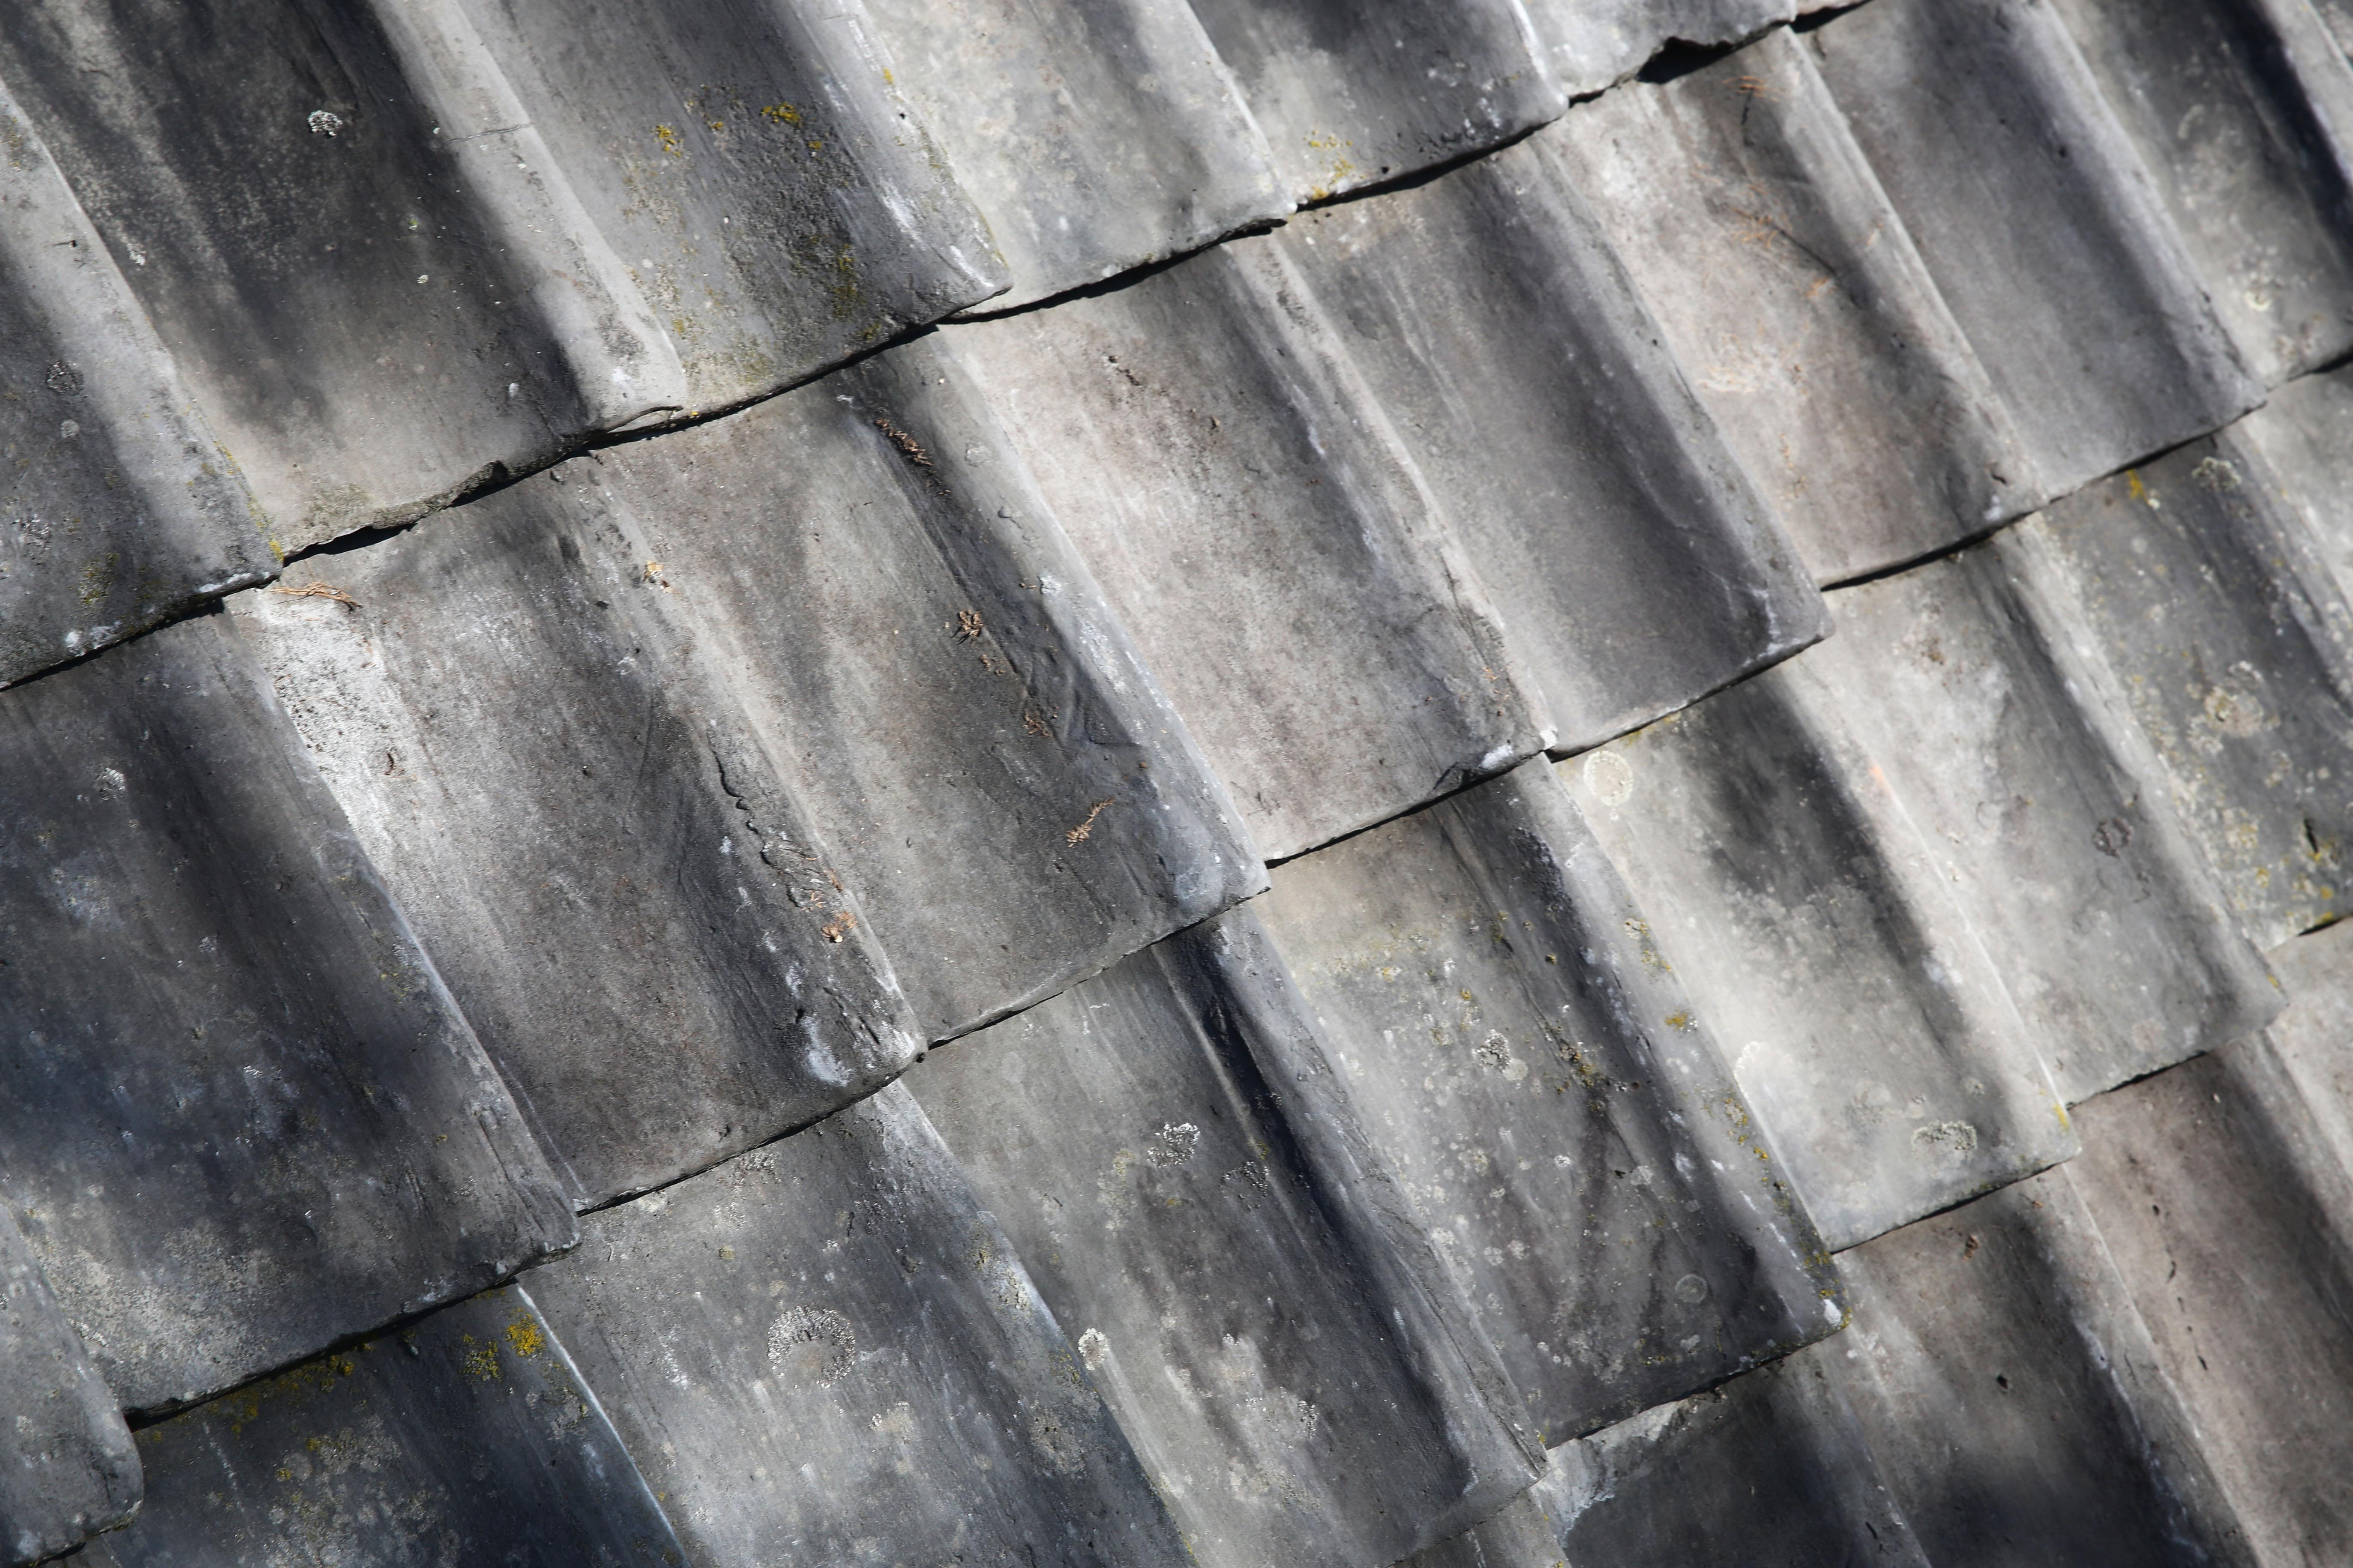 Other Old Blue Braised Roof Tiles Called 'Oude Holle'